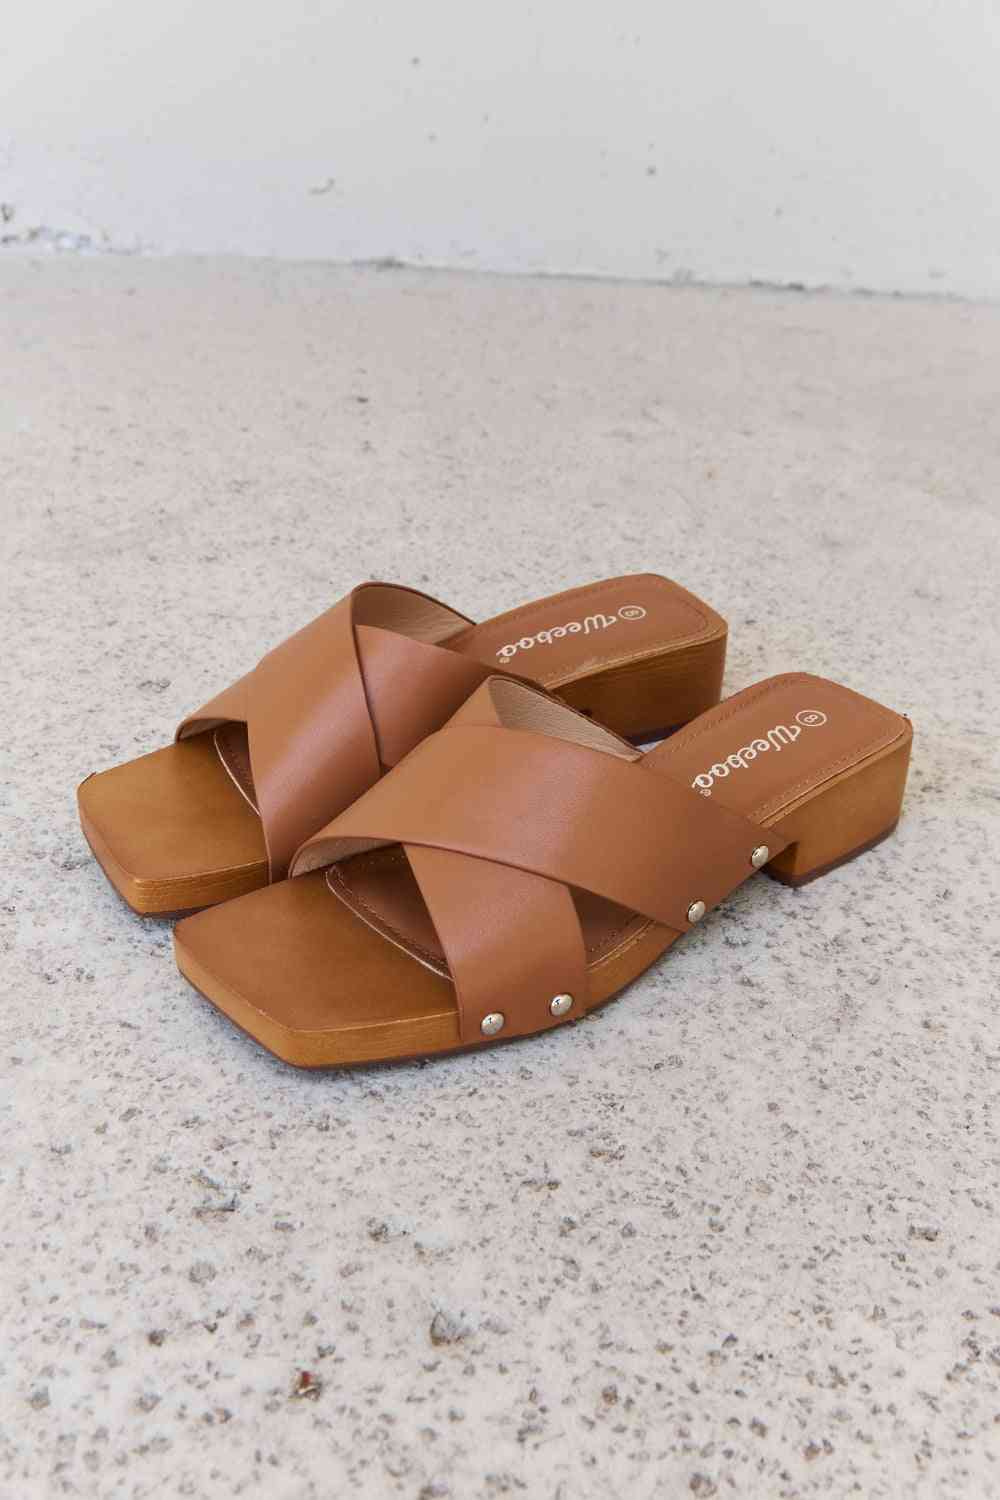 Gray Weeboo Step Into Summer Criss Cross Wooden Clog Mule in Brown Shoes